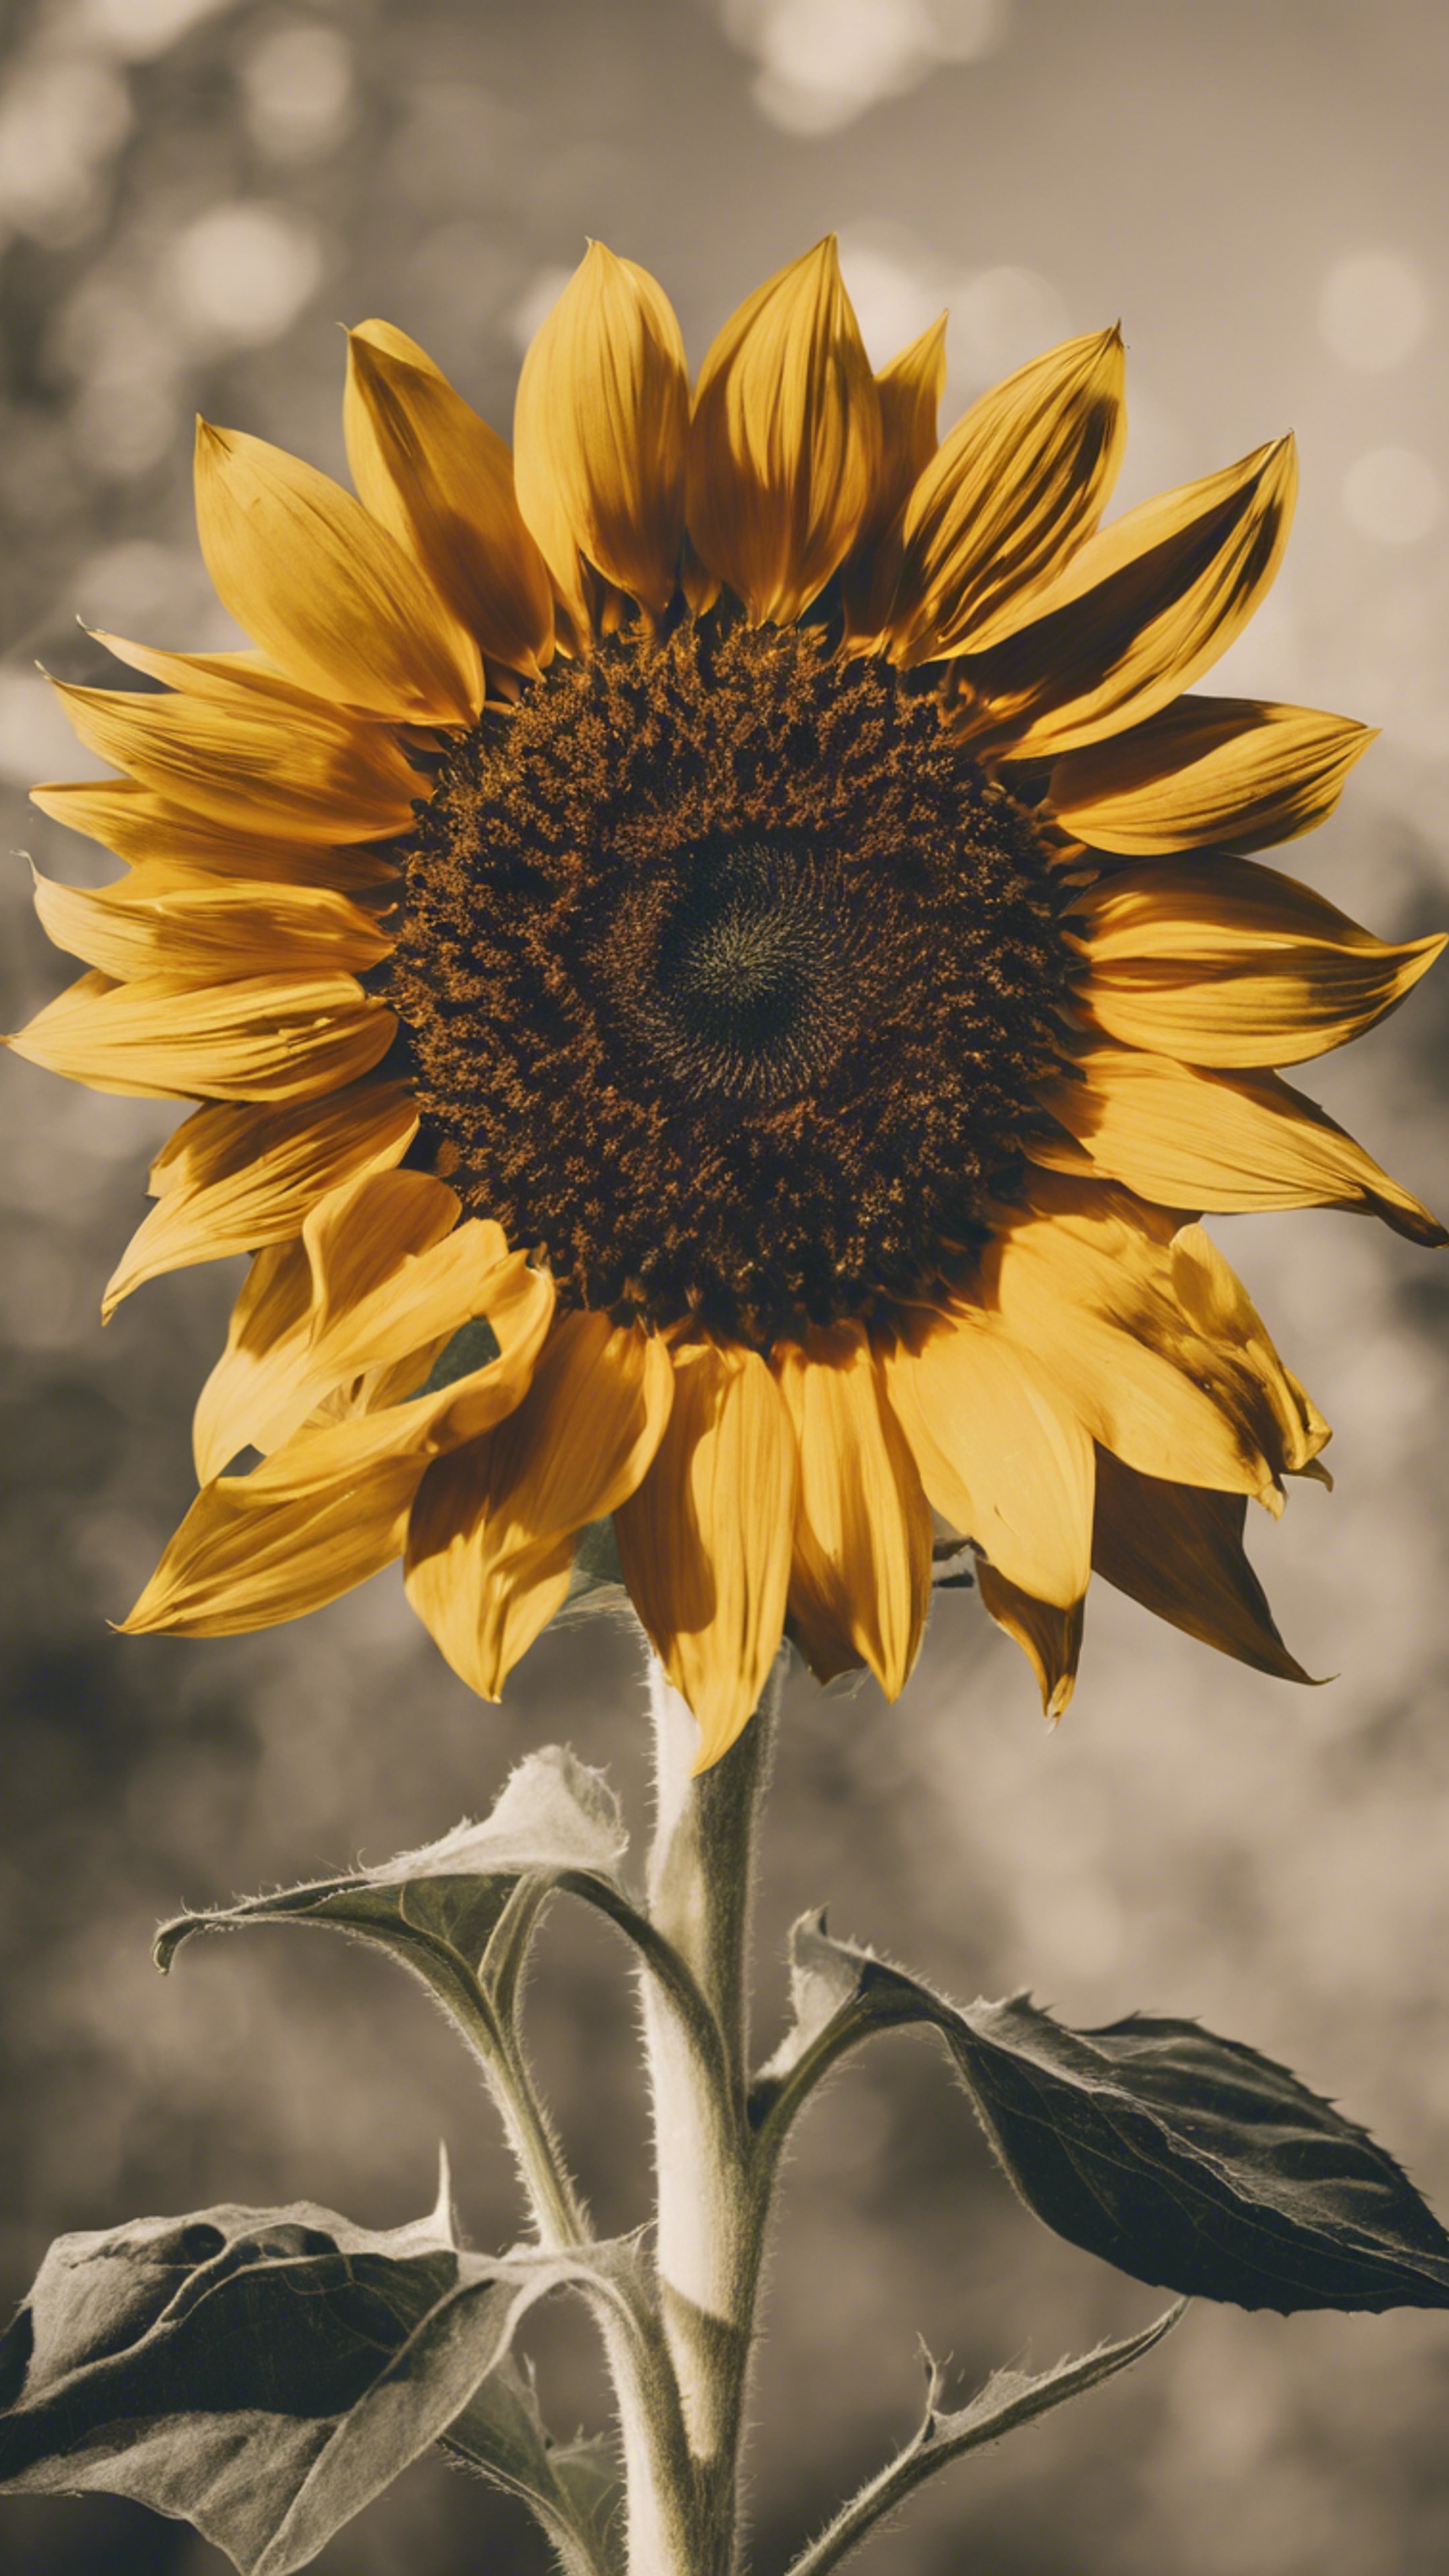 A stylized retro sunflower with bold yellow petals and a dark brown center. Hình nền[13785a0774844f708a81]